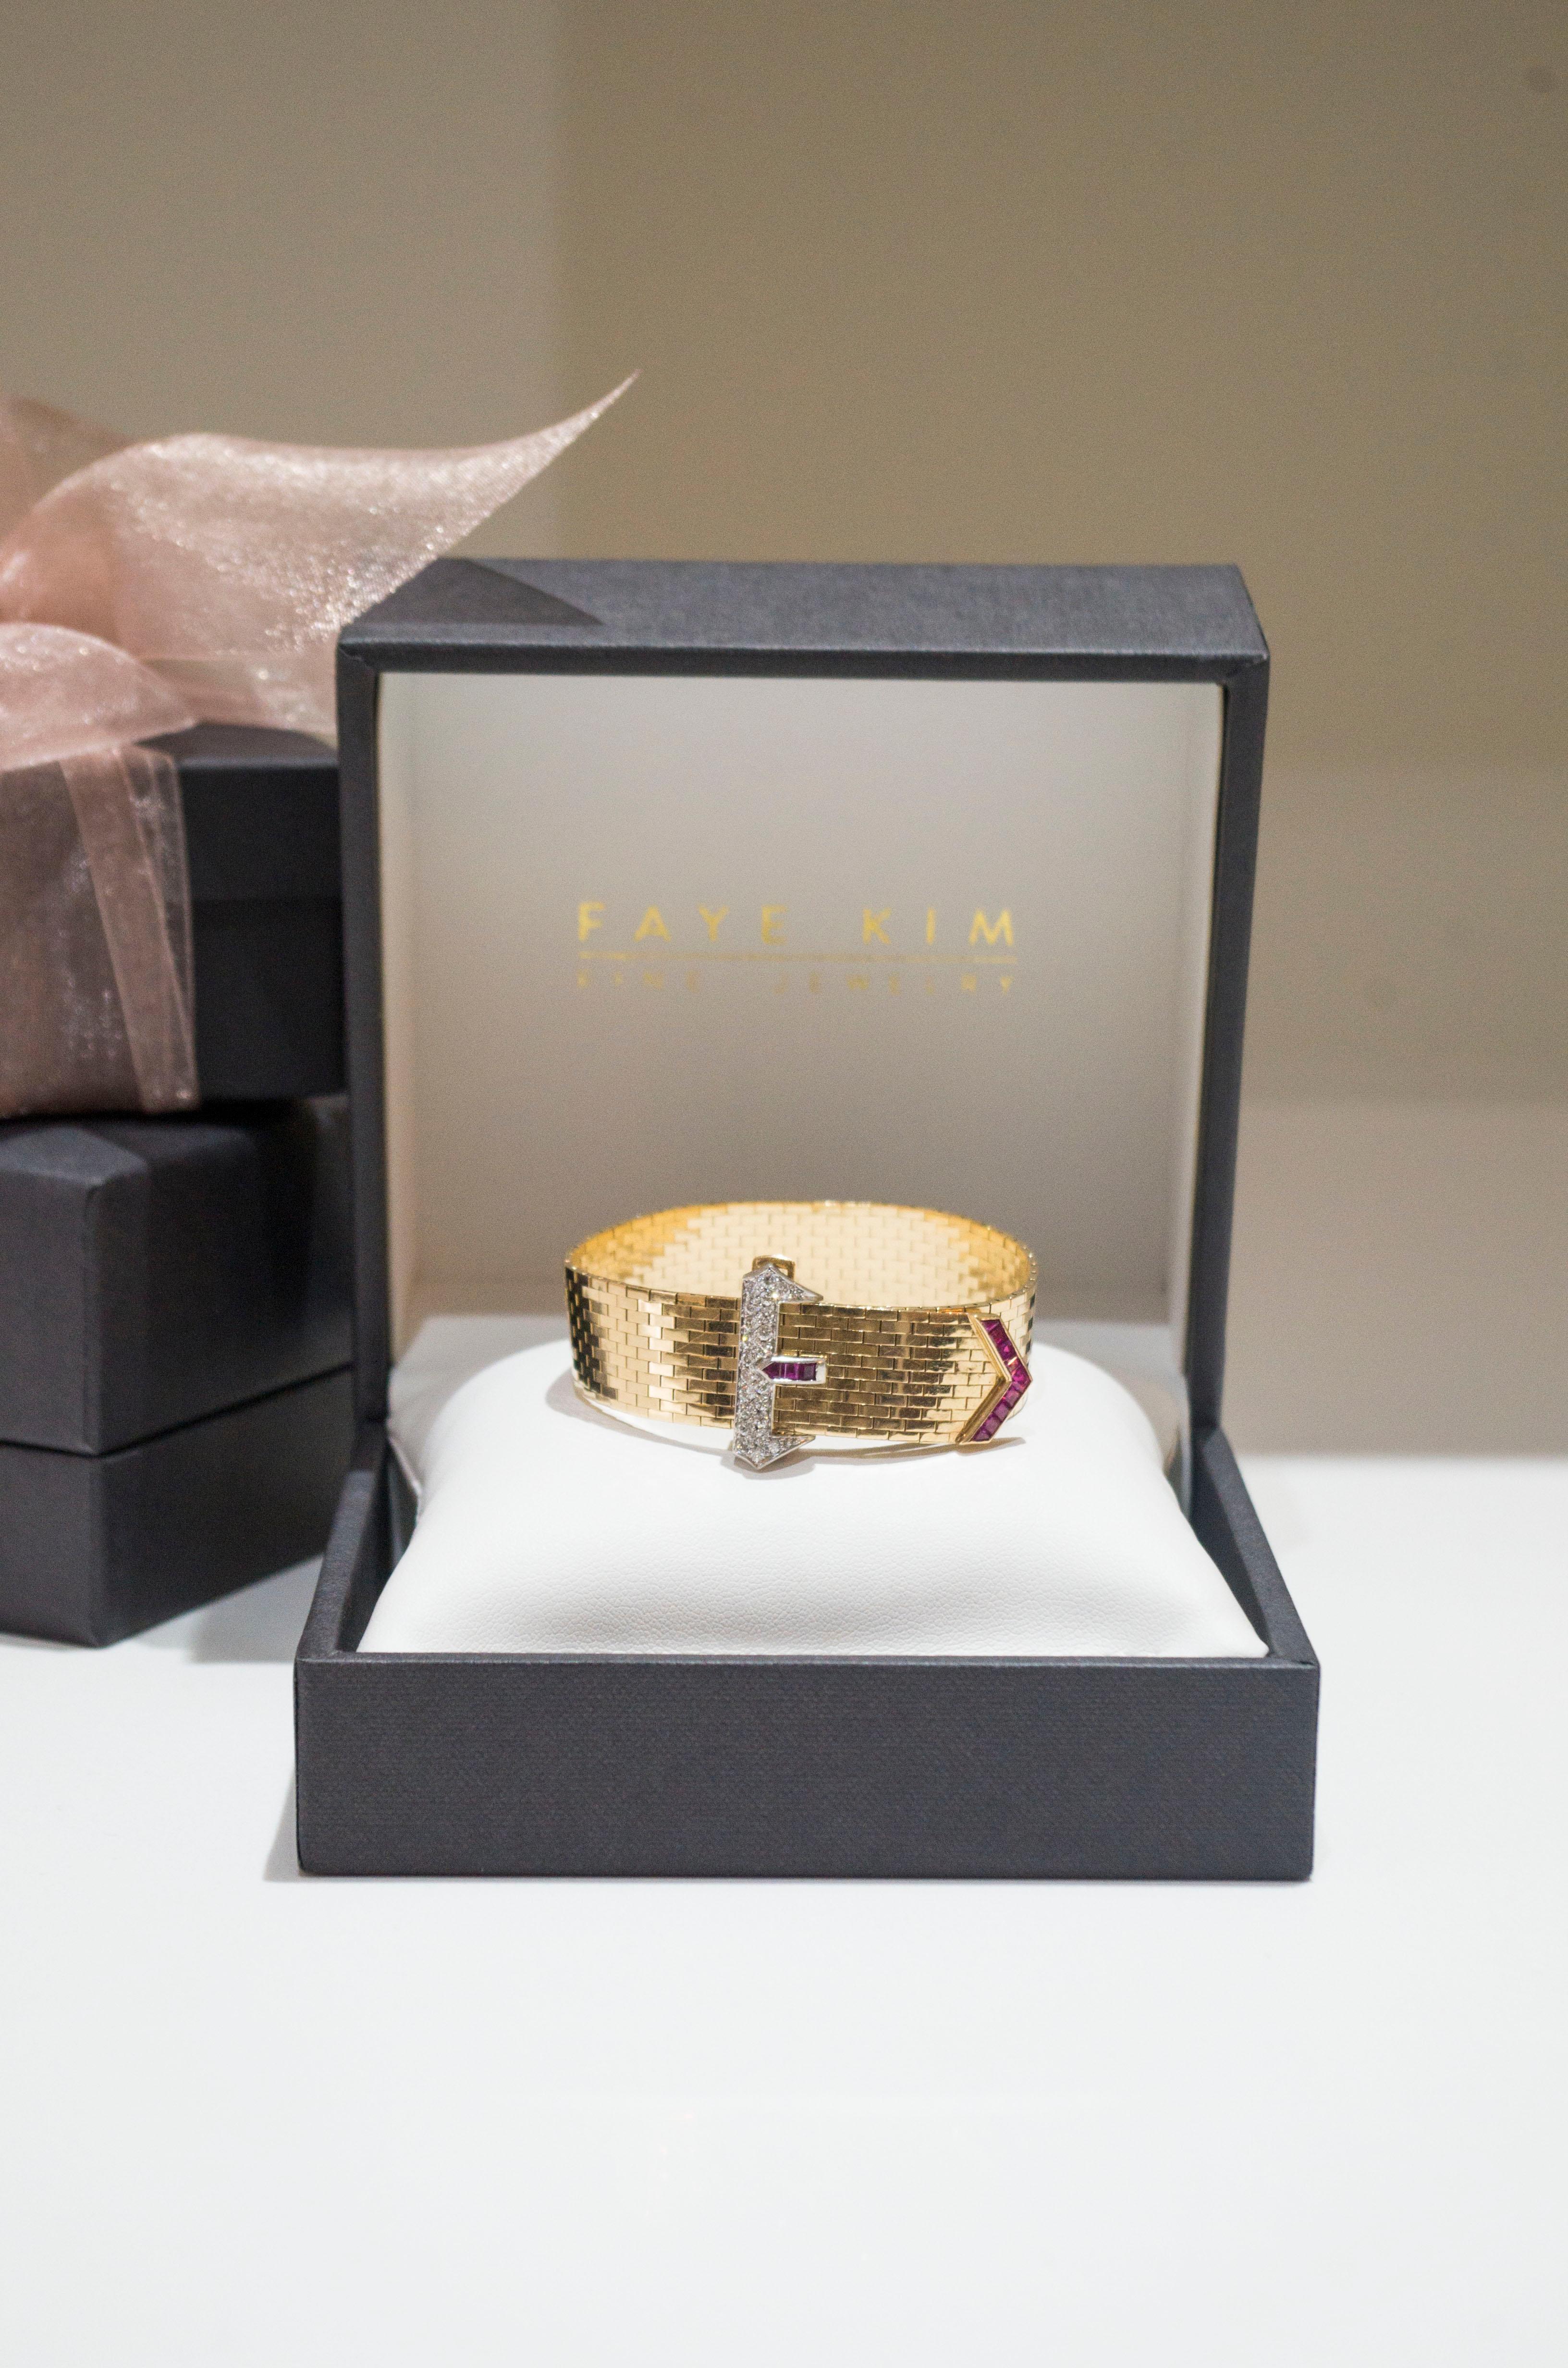 14k Yellow Gold Diamond and Ruby Flexible Brick Mesh Strap Buckle Bracelet in the Art Deco Style
 
The quality of the craftsmanship is evident in its flexible brick mesh that is elegantly embellished with diamonds set in platinum and rubies in